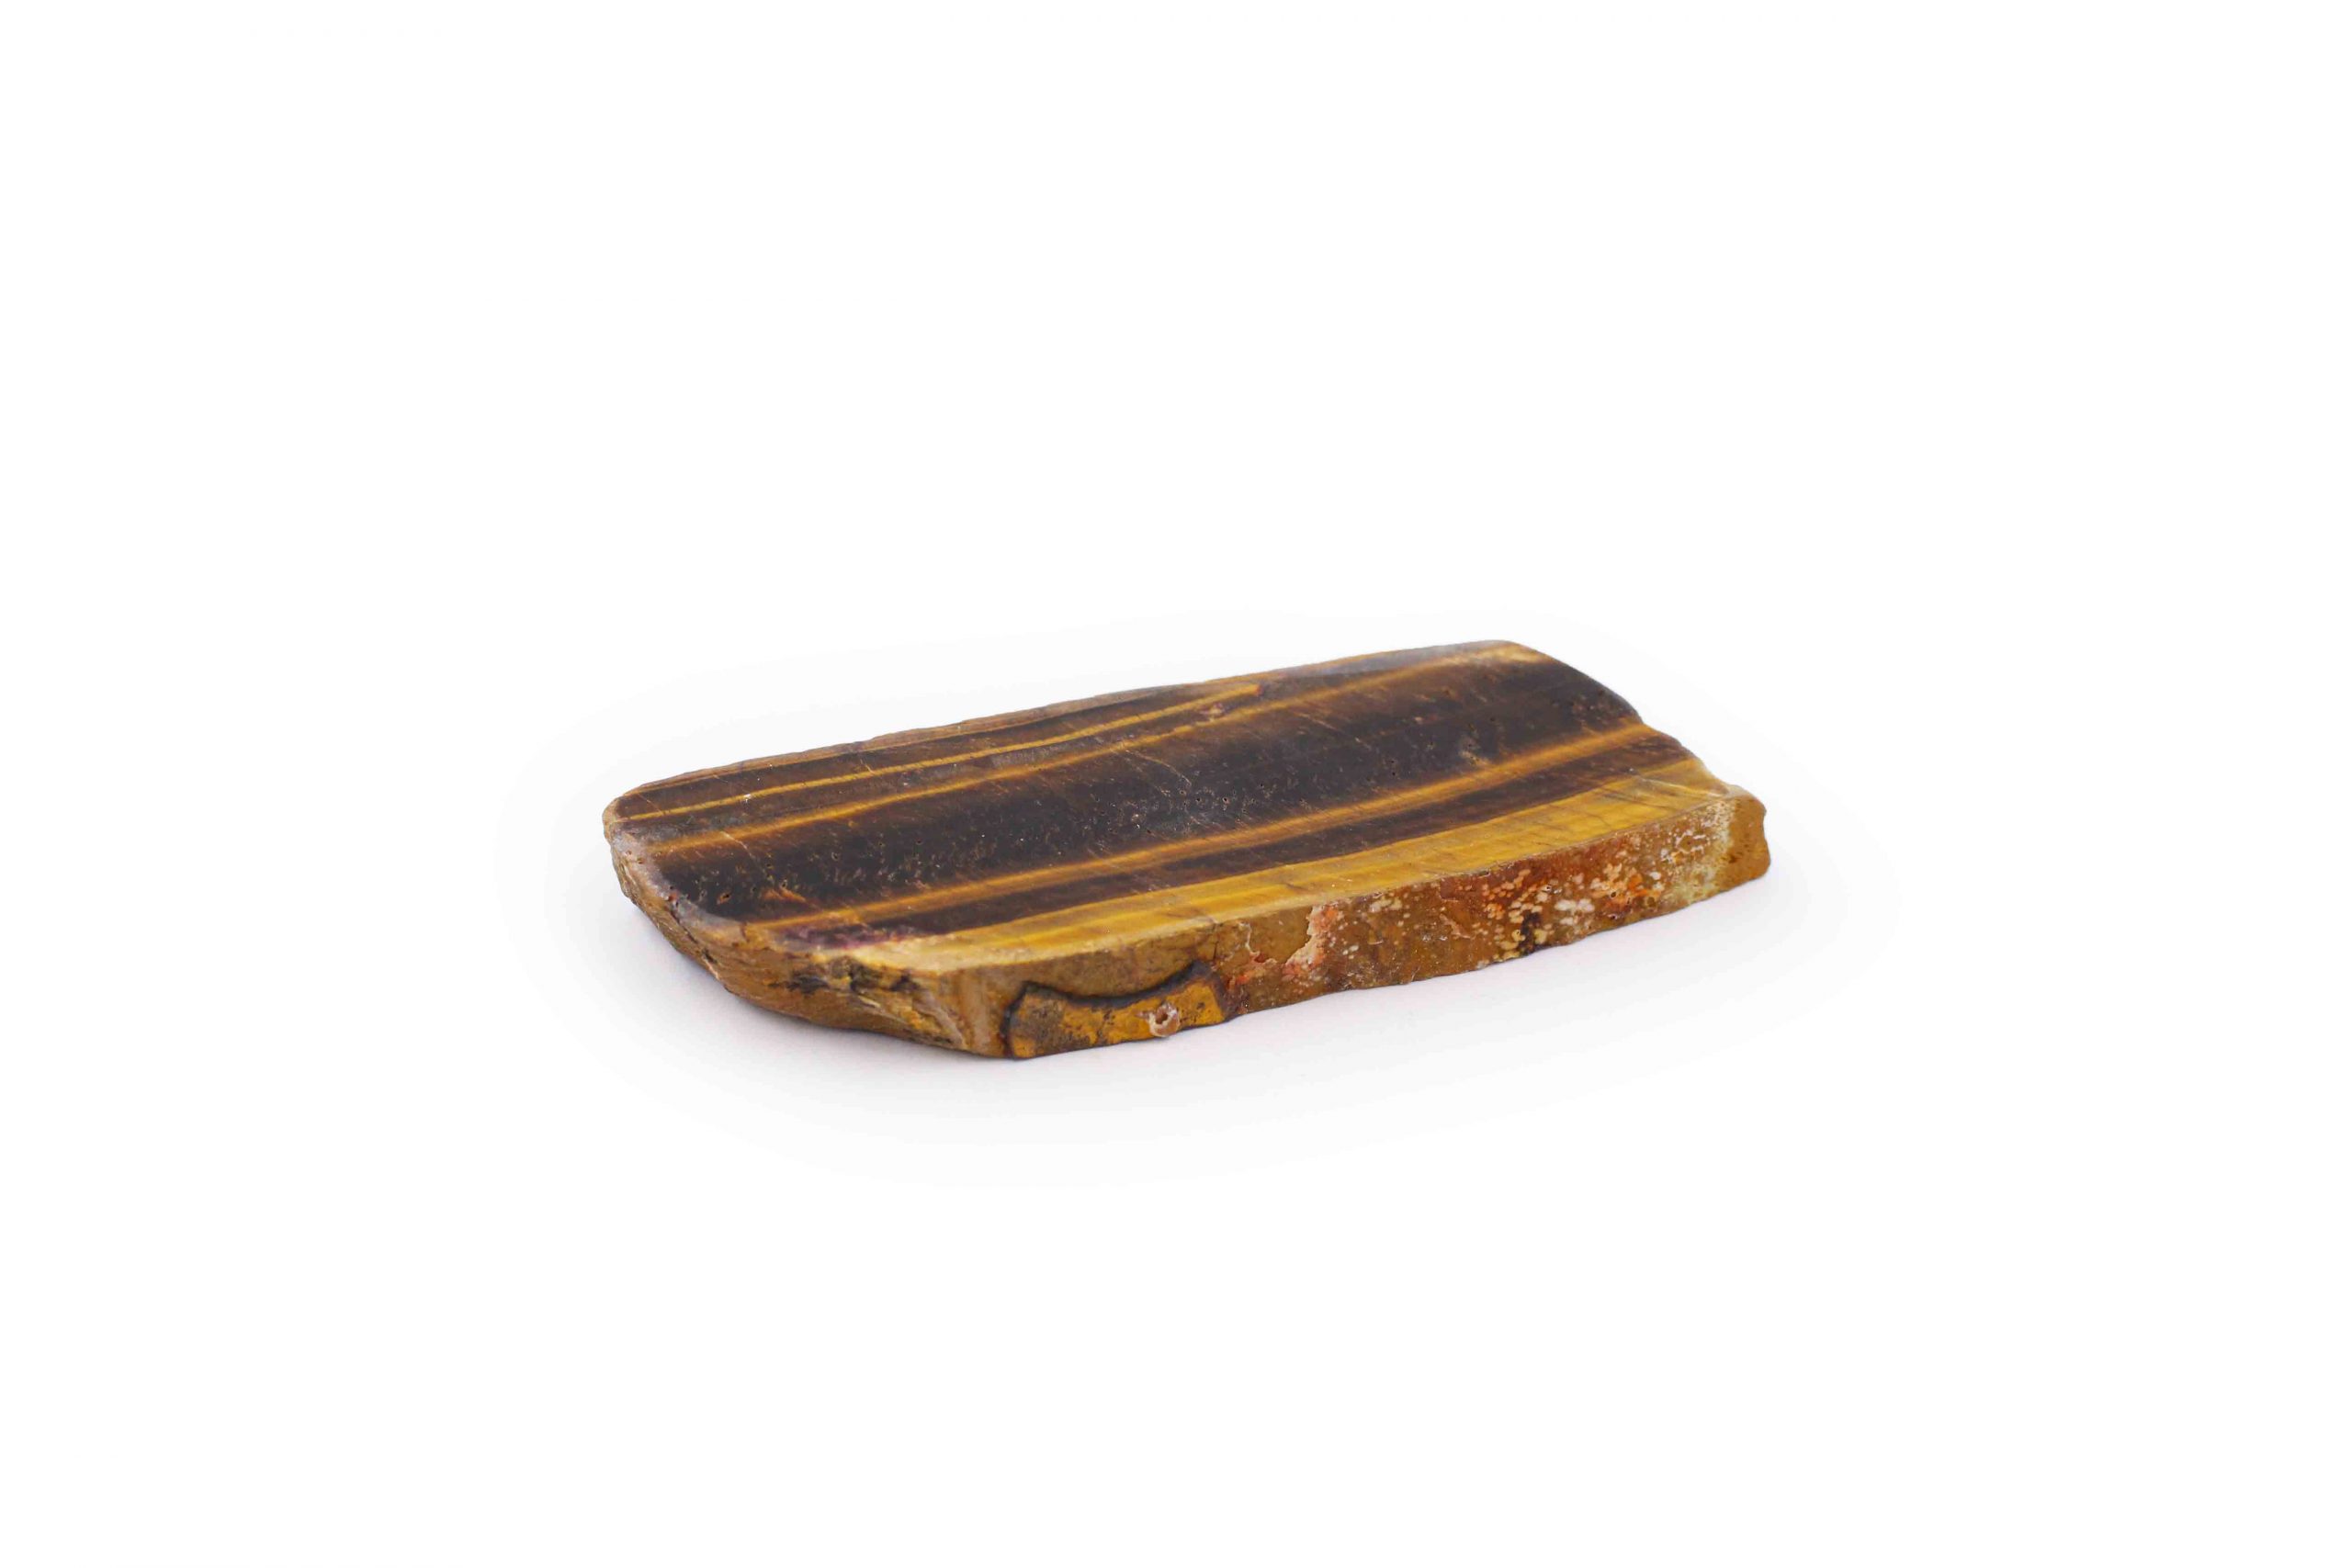 Tiger Eye Rough with One Polished Side- Crystal Dreams